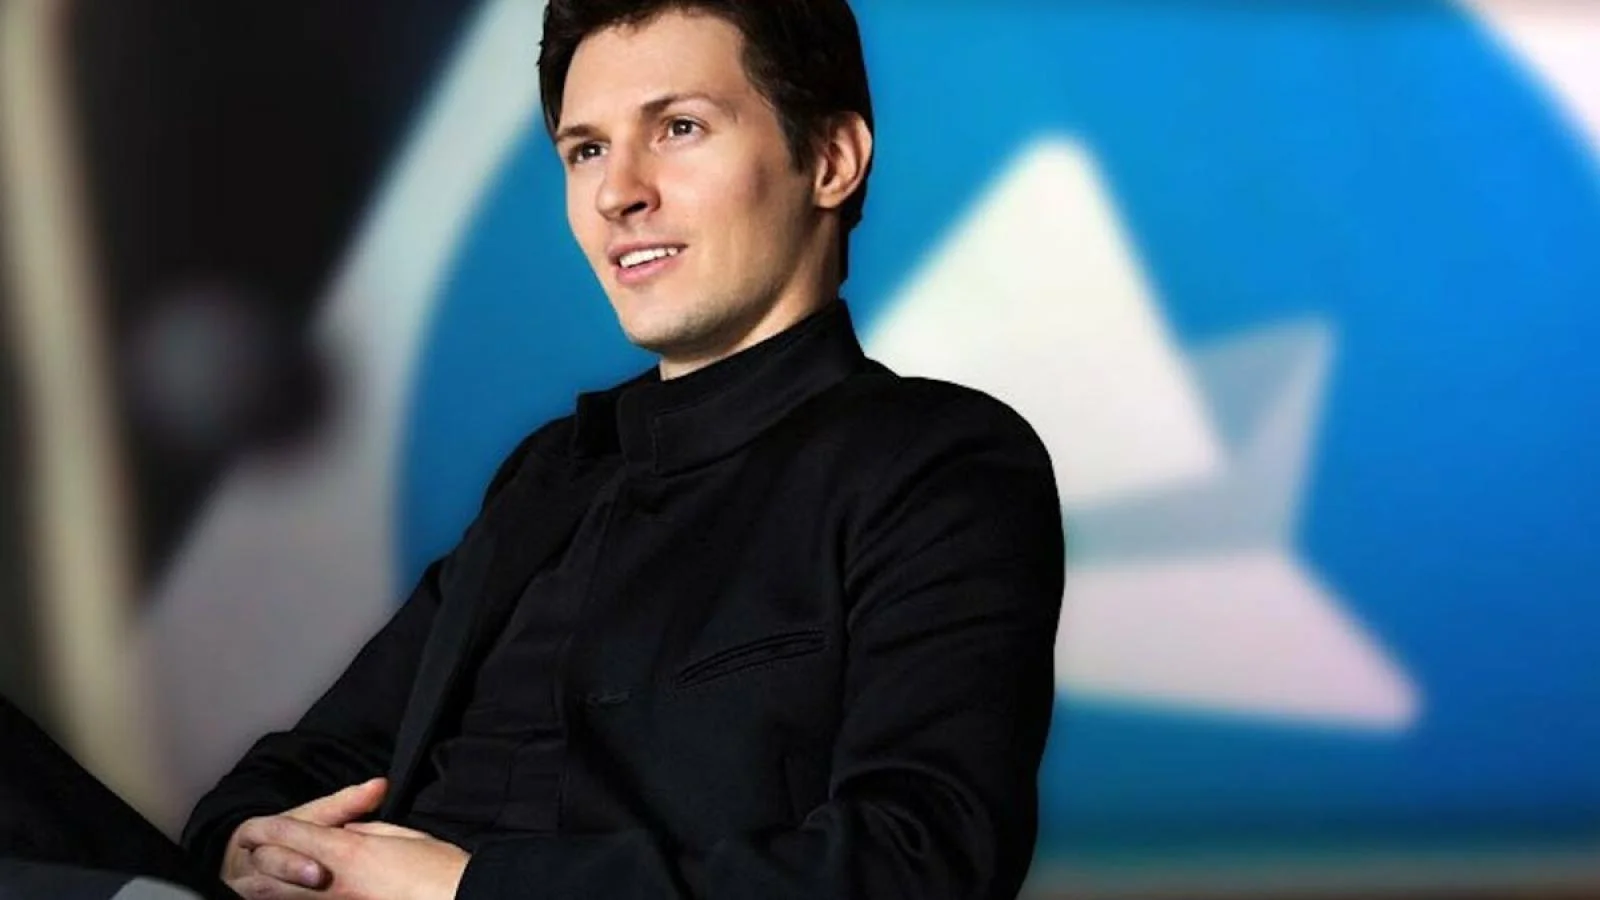 Pavel Durov: Premium subscription will cover the costs of developers on Telegram